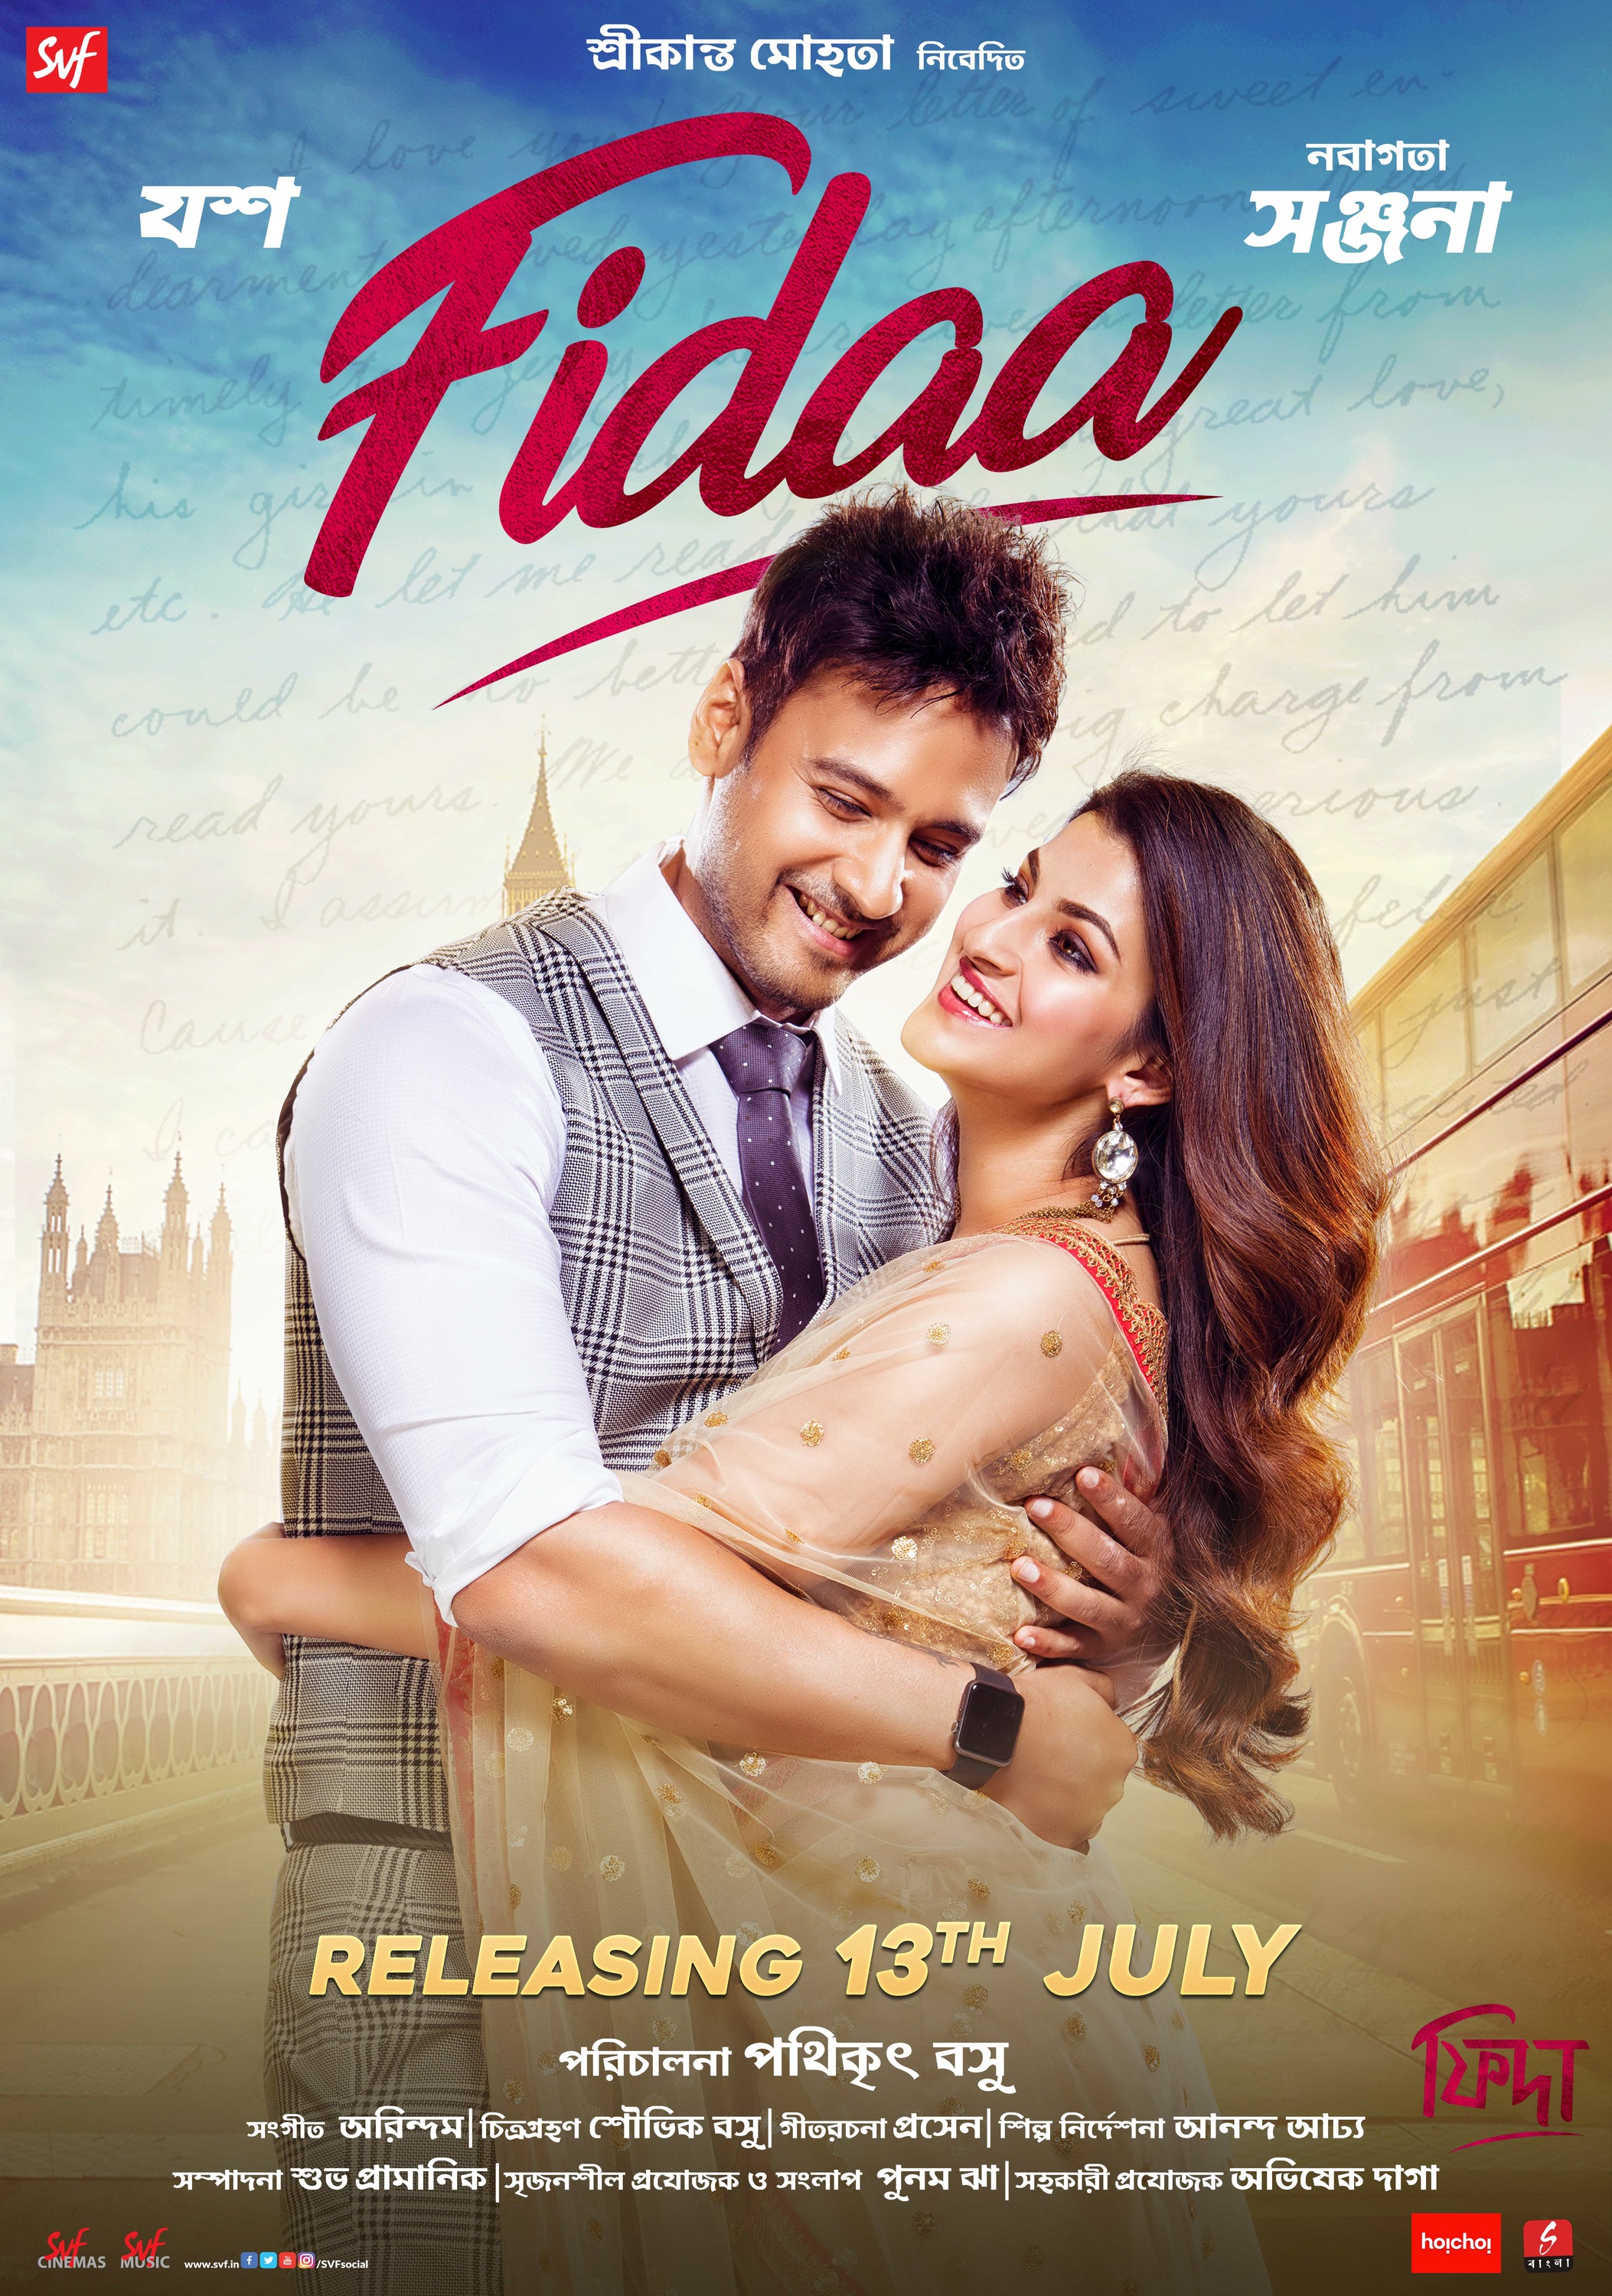 Mega Sized Movie Poster Image for Fidaa (#2 of 4)